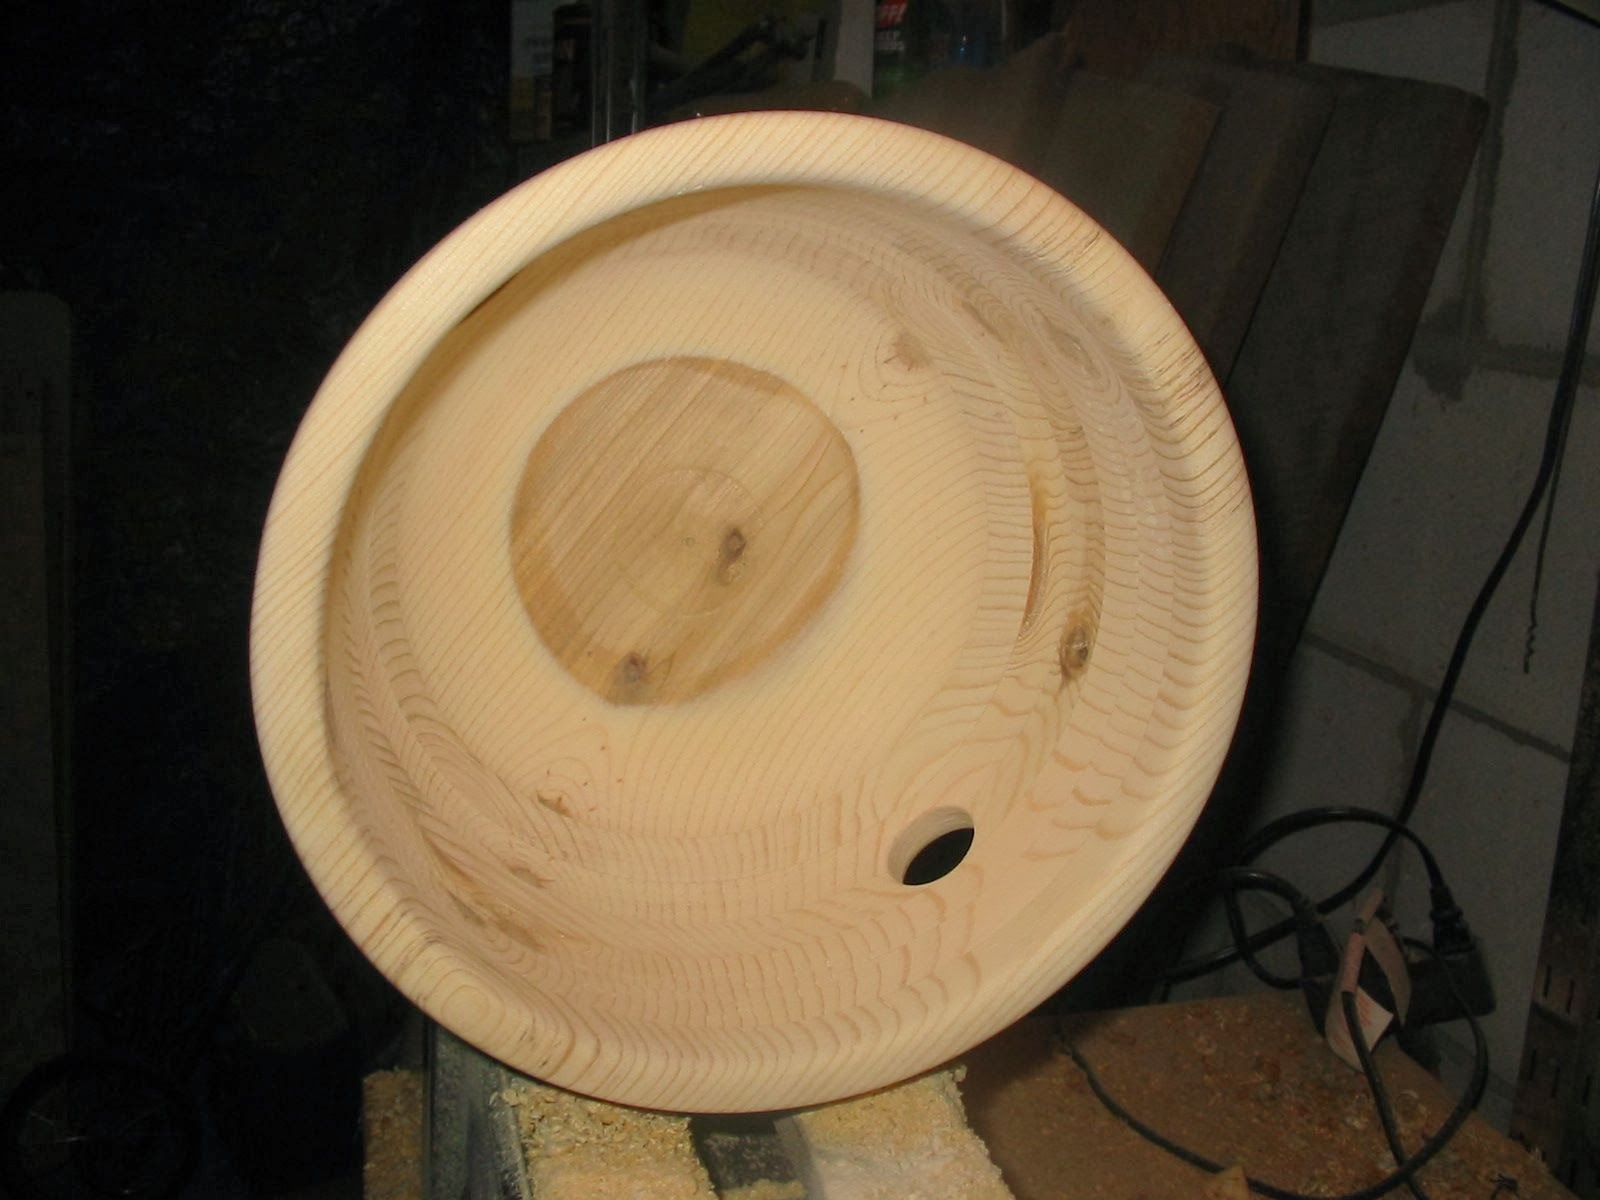 Woodworking plans urn for cremains youtube
 